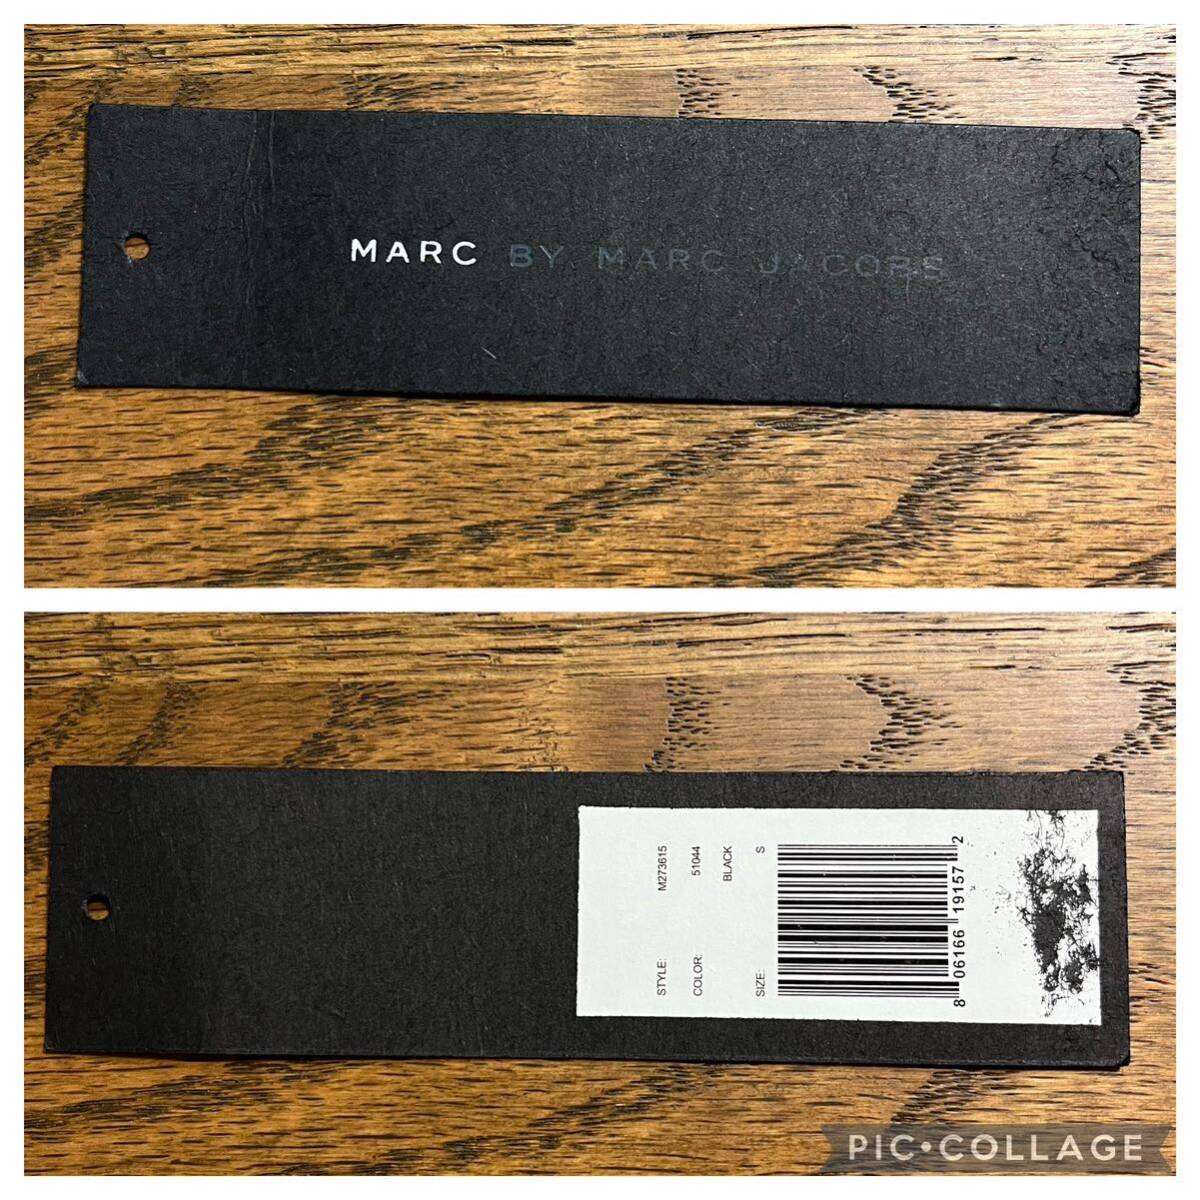 MARC BY MARC JACOBS / BICYCLE TEE / SIZE:S / BLACK / マークバイマークジェイコブス / ロング丈 プリント半袖Tシャツ / UNISEX_画像9